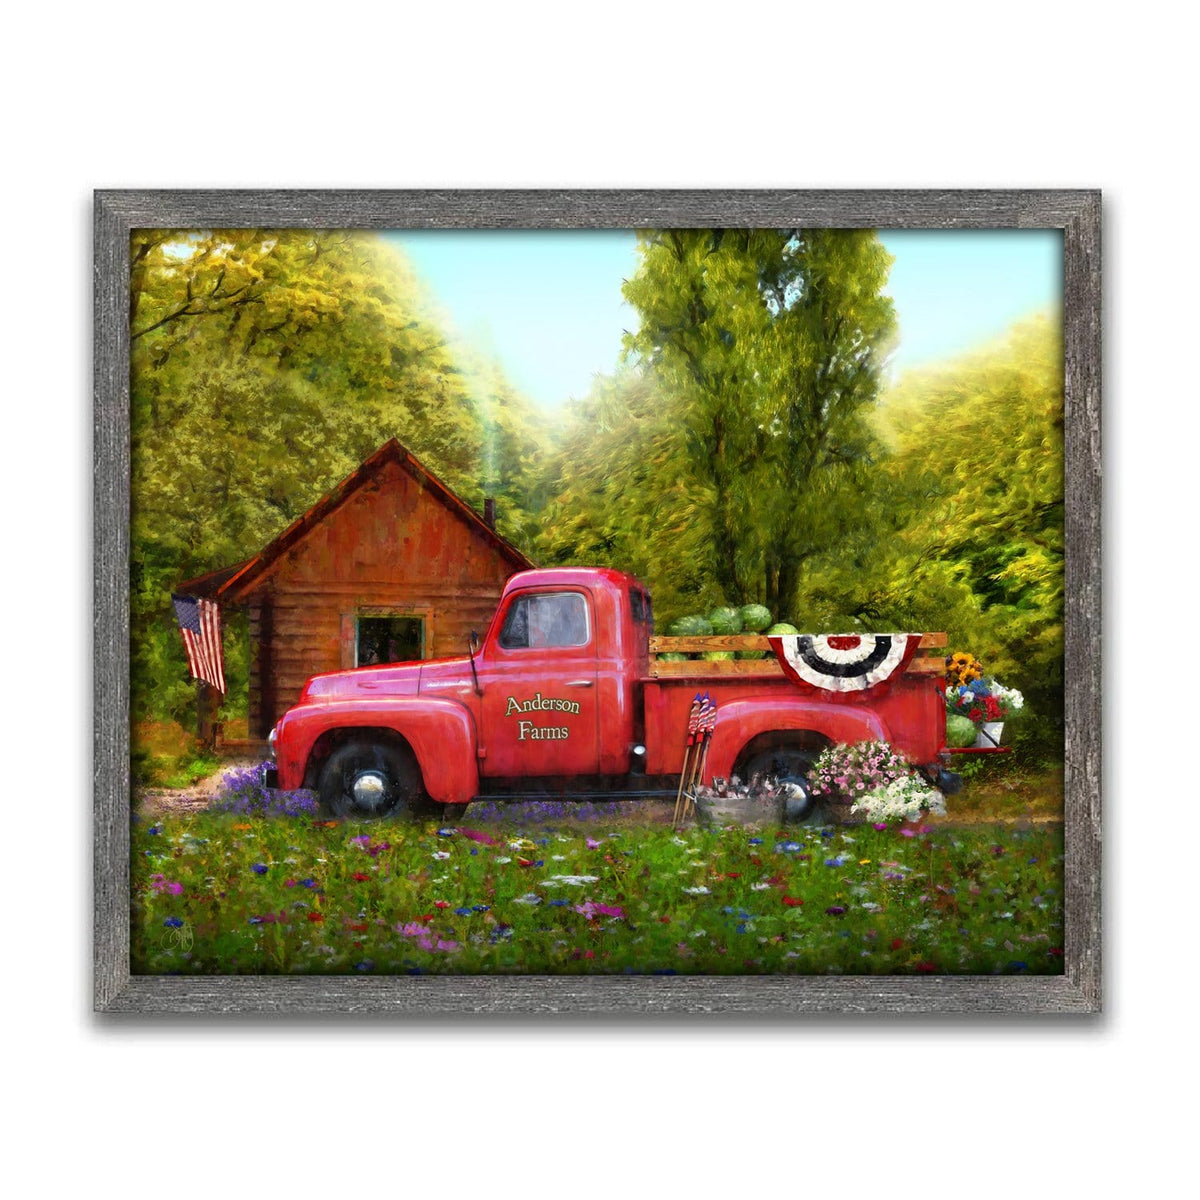 framed canvas art of red truck and American flag